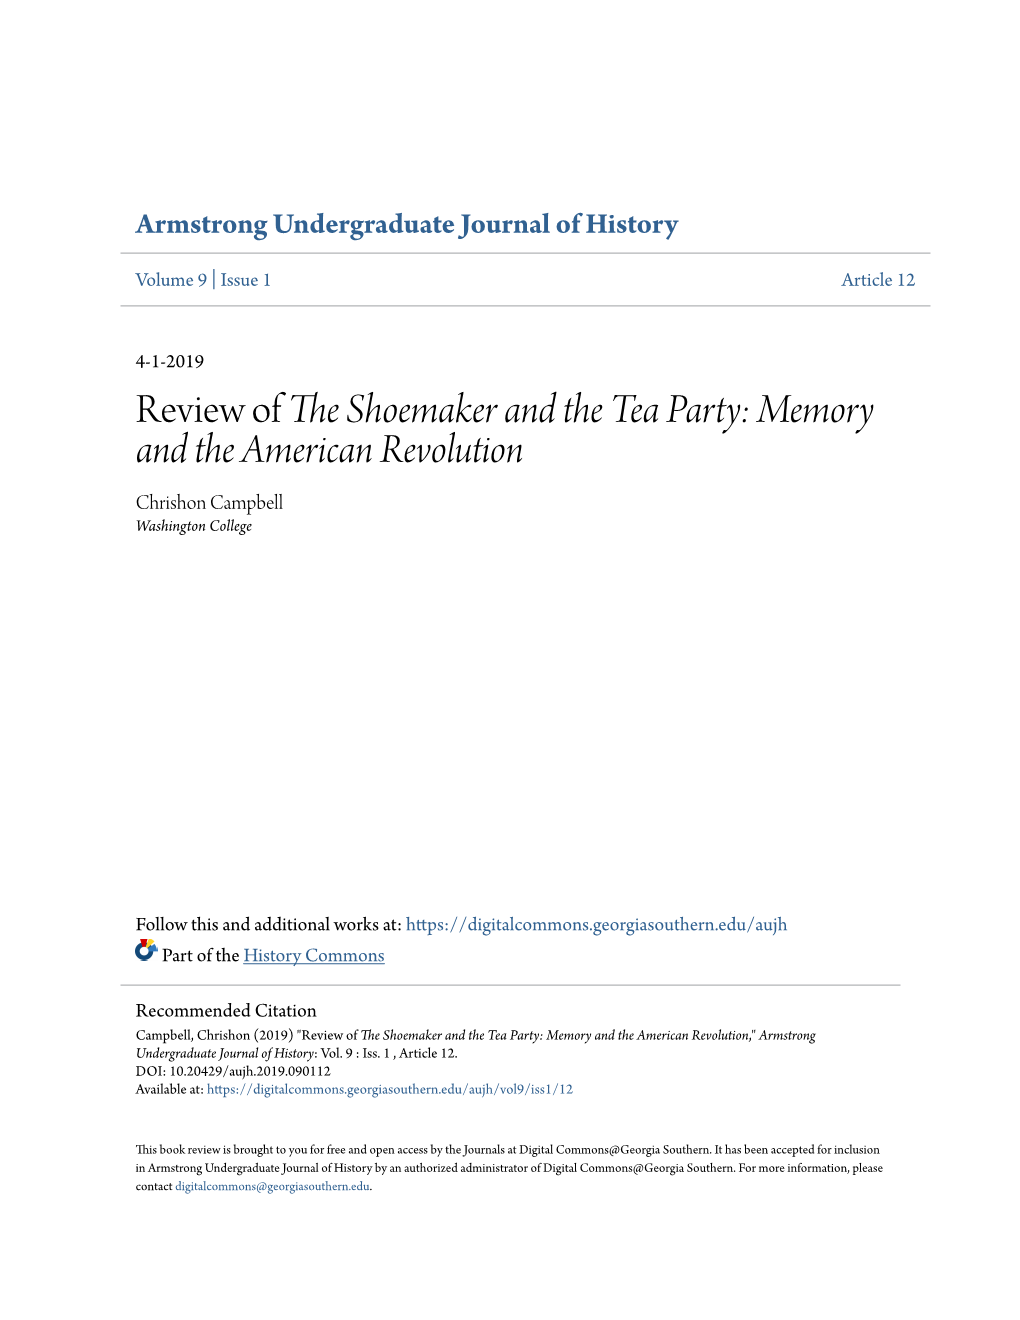 Review of the Shoemaker and the Tea Party: Memory and the American Revolution Chrishon Campbell Washington College